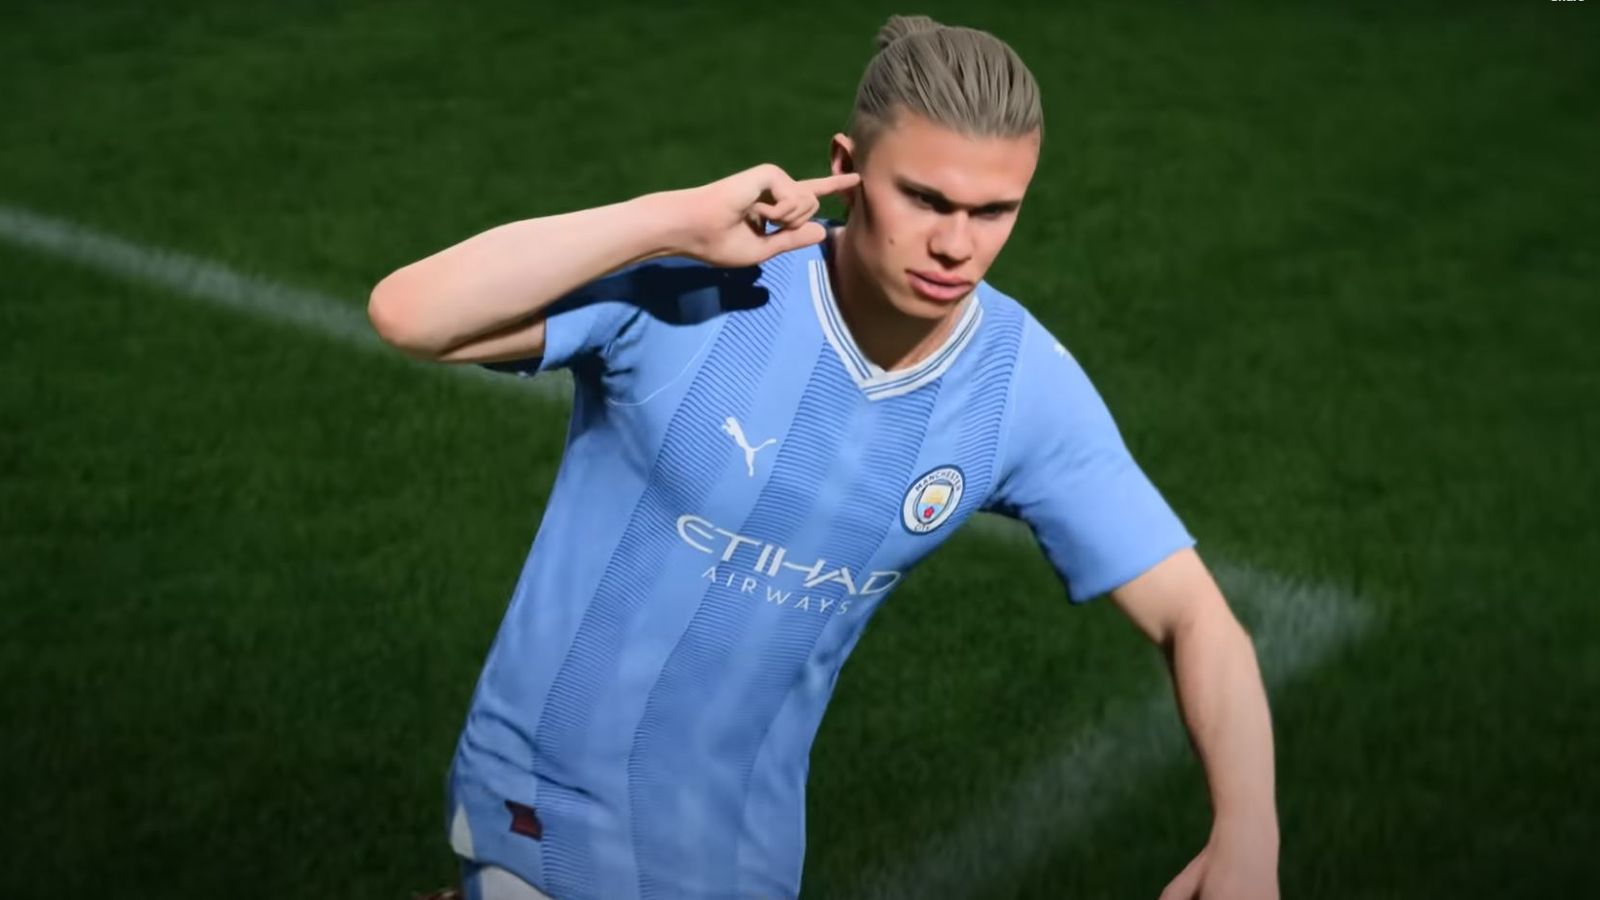 FIFA Interactive World Cup ‘in disarray’ as EA Sports unveils rebranded game |  Science and technology news